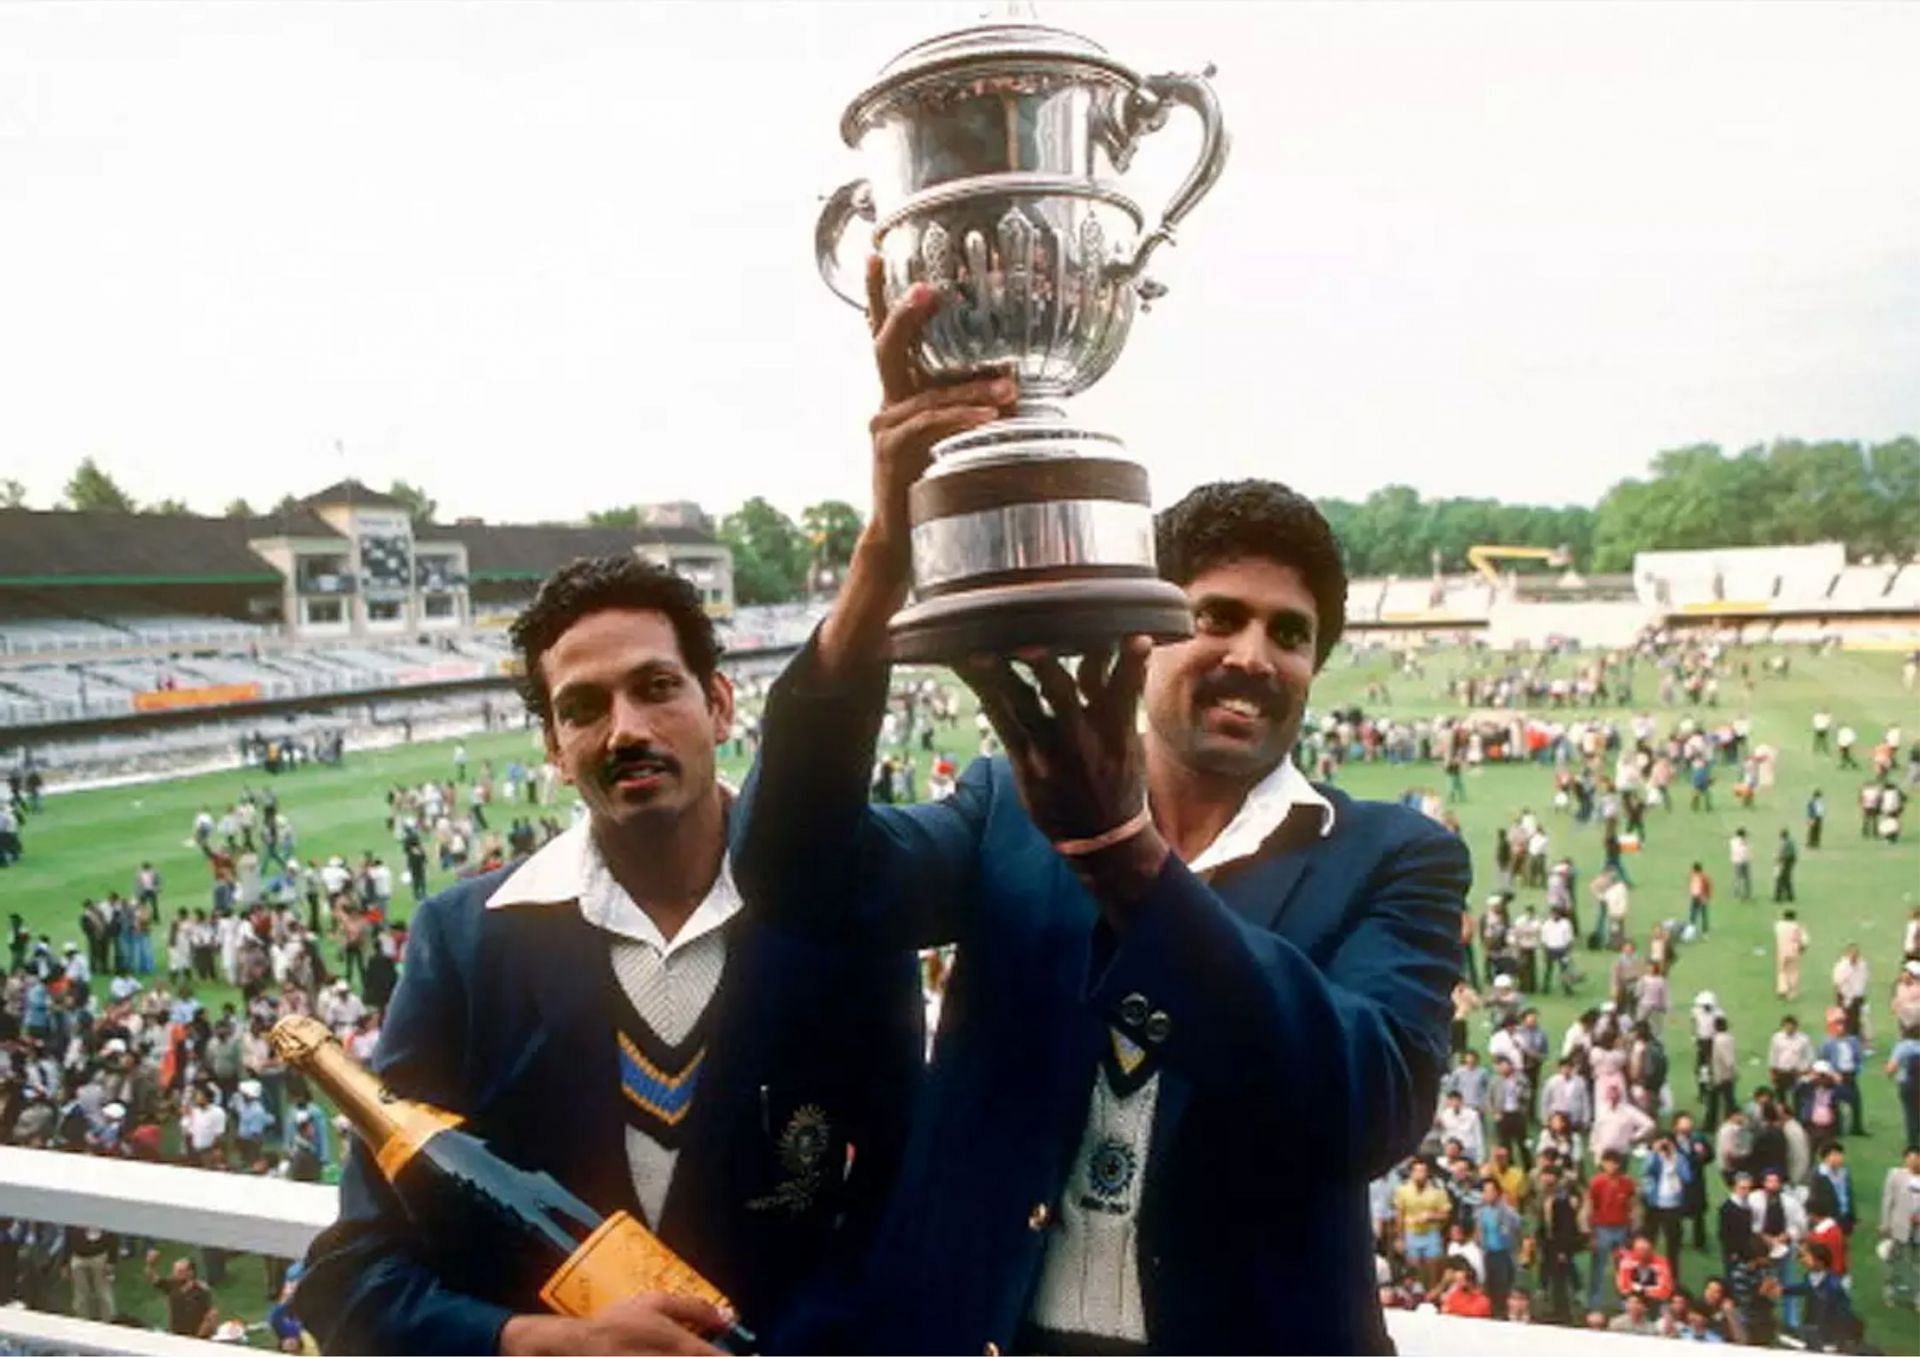 India were the surprise champions at the 1983 World Cup. [P/C: Patrick Eager/Popperfoto via Getty Images]